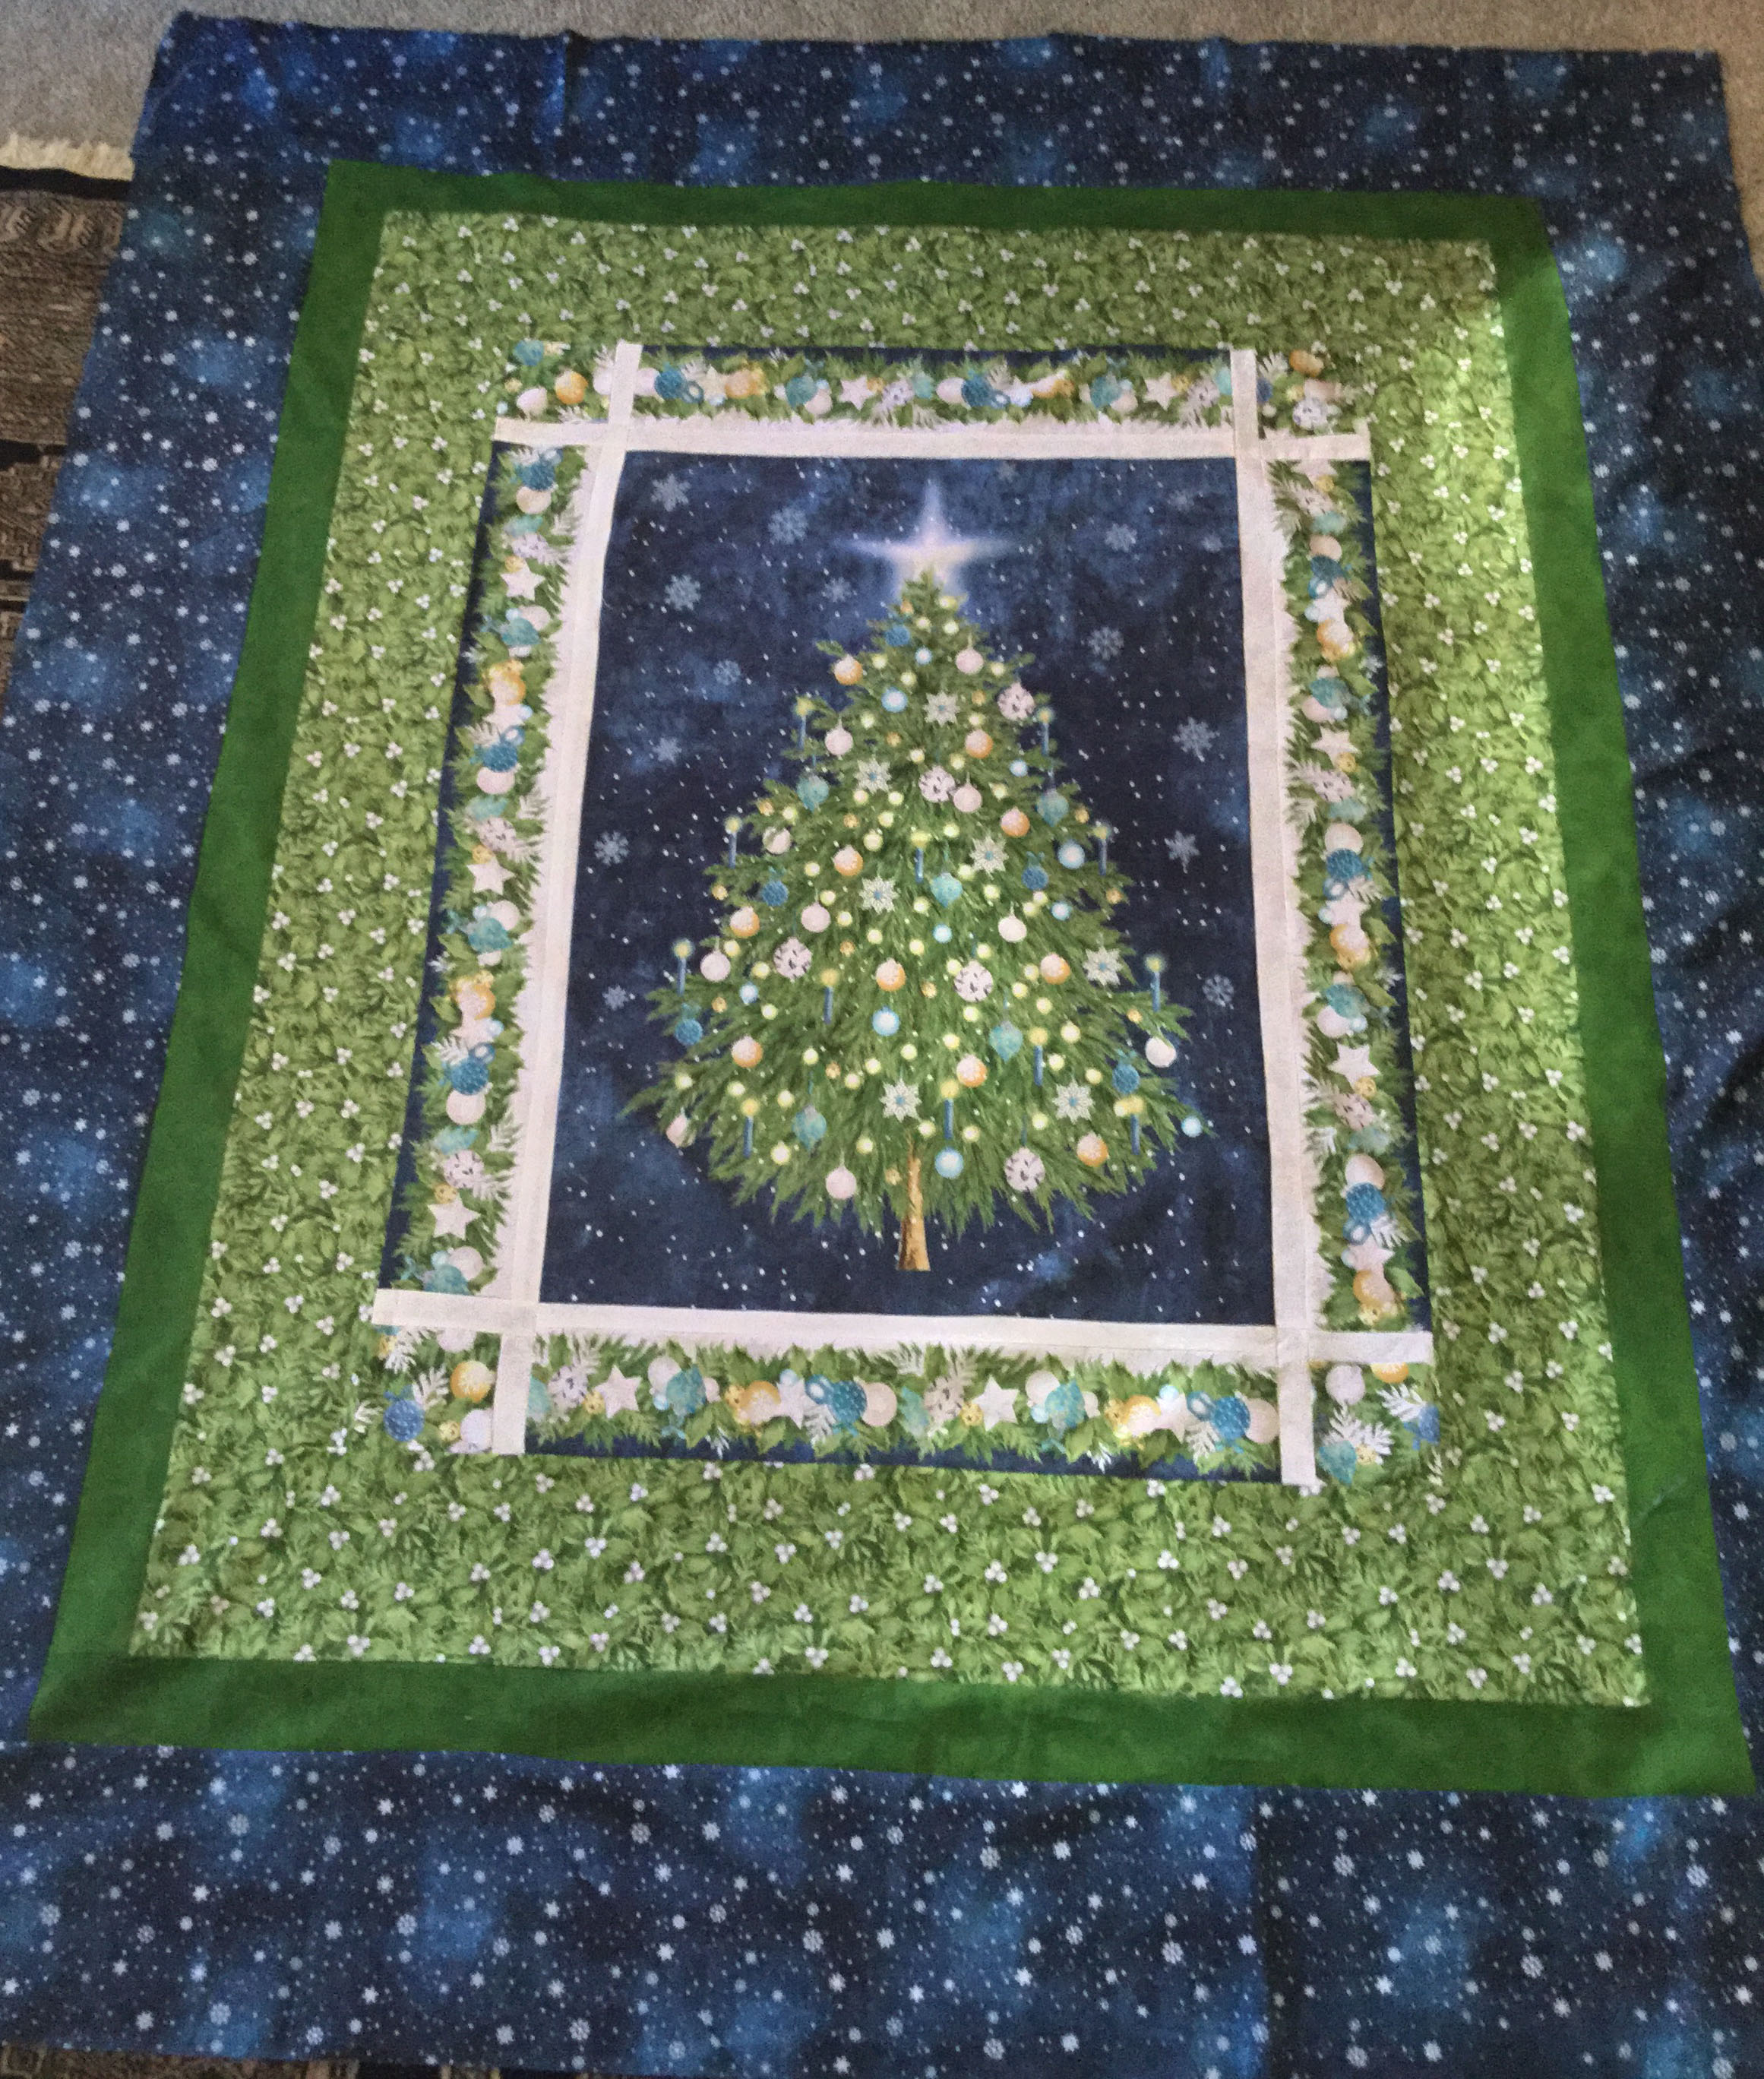 Handsome and Petals O Christmas Tree Lap Quilt Pattern